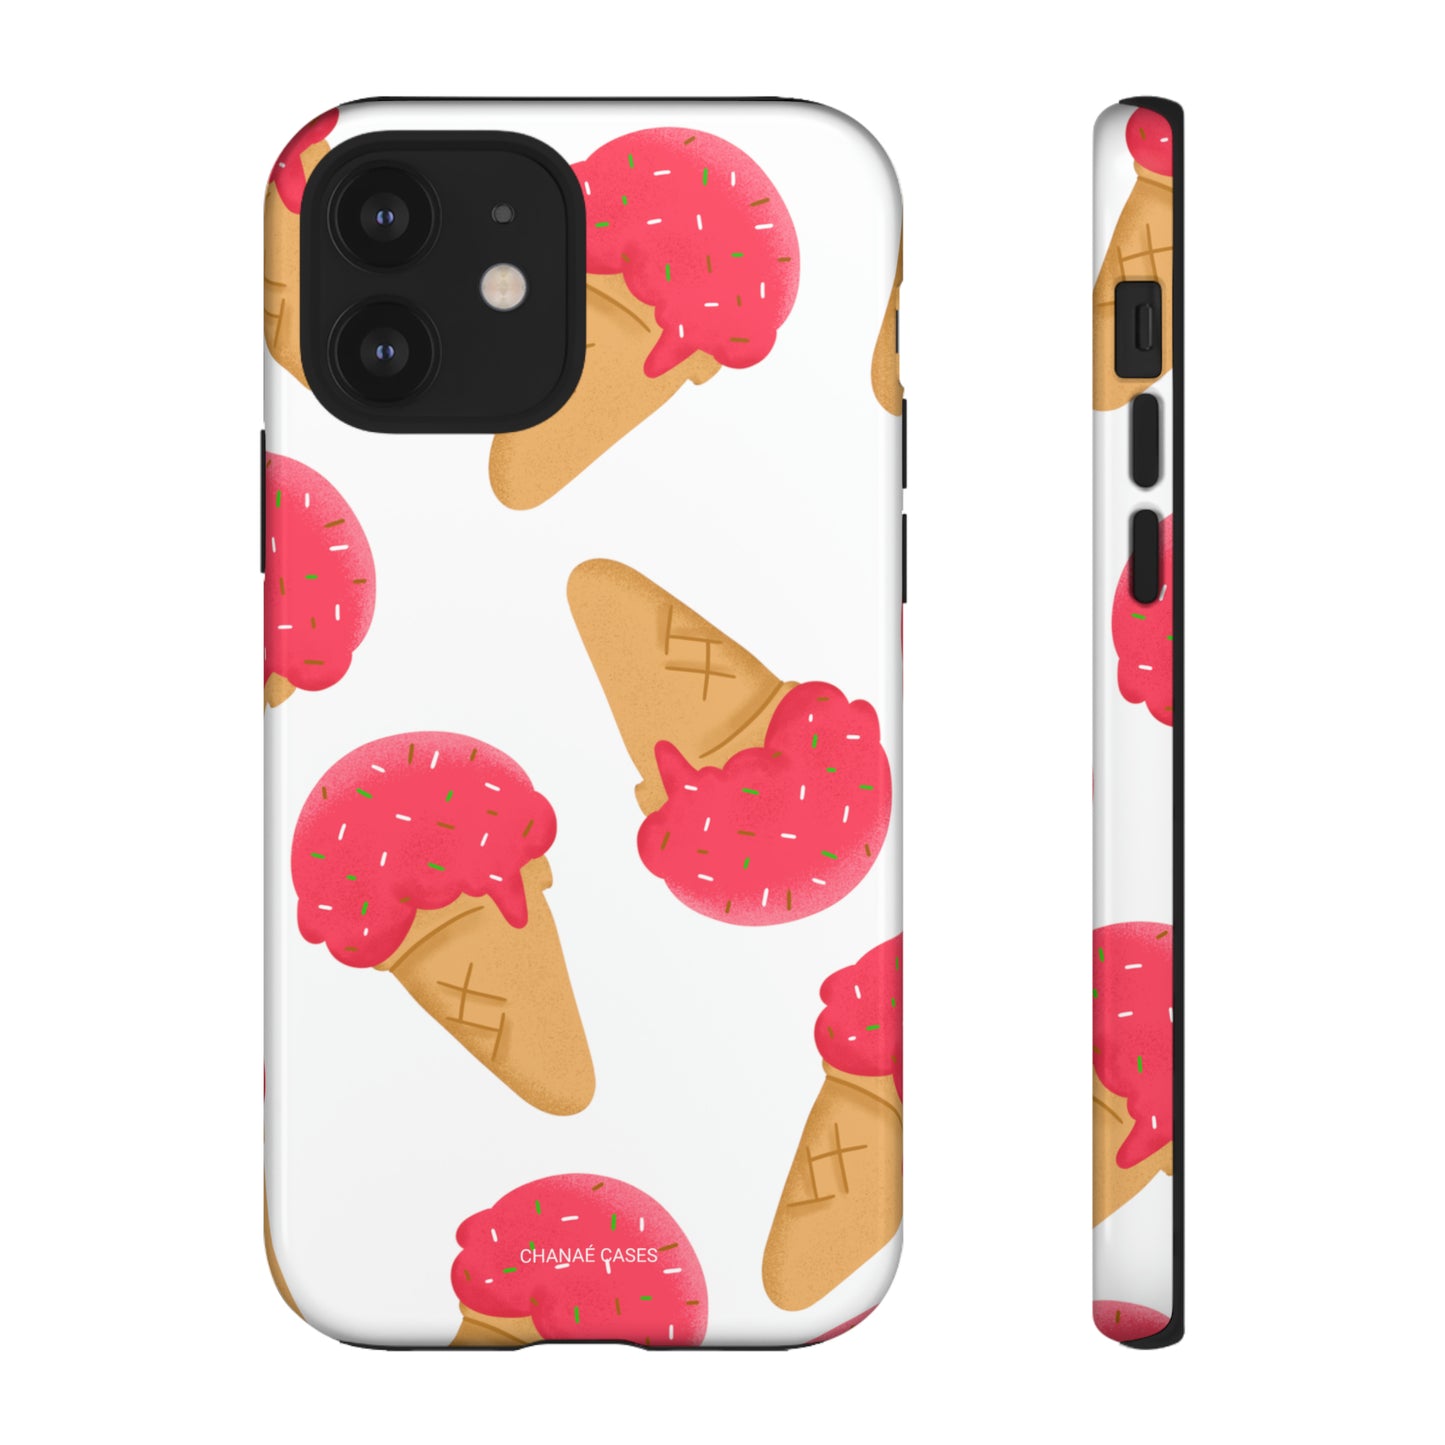 One Scoop Please! iPhone "Tough" Case (White)